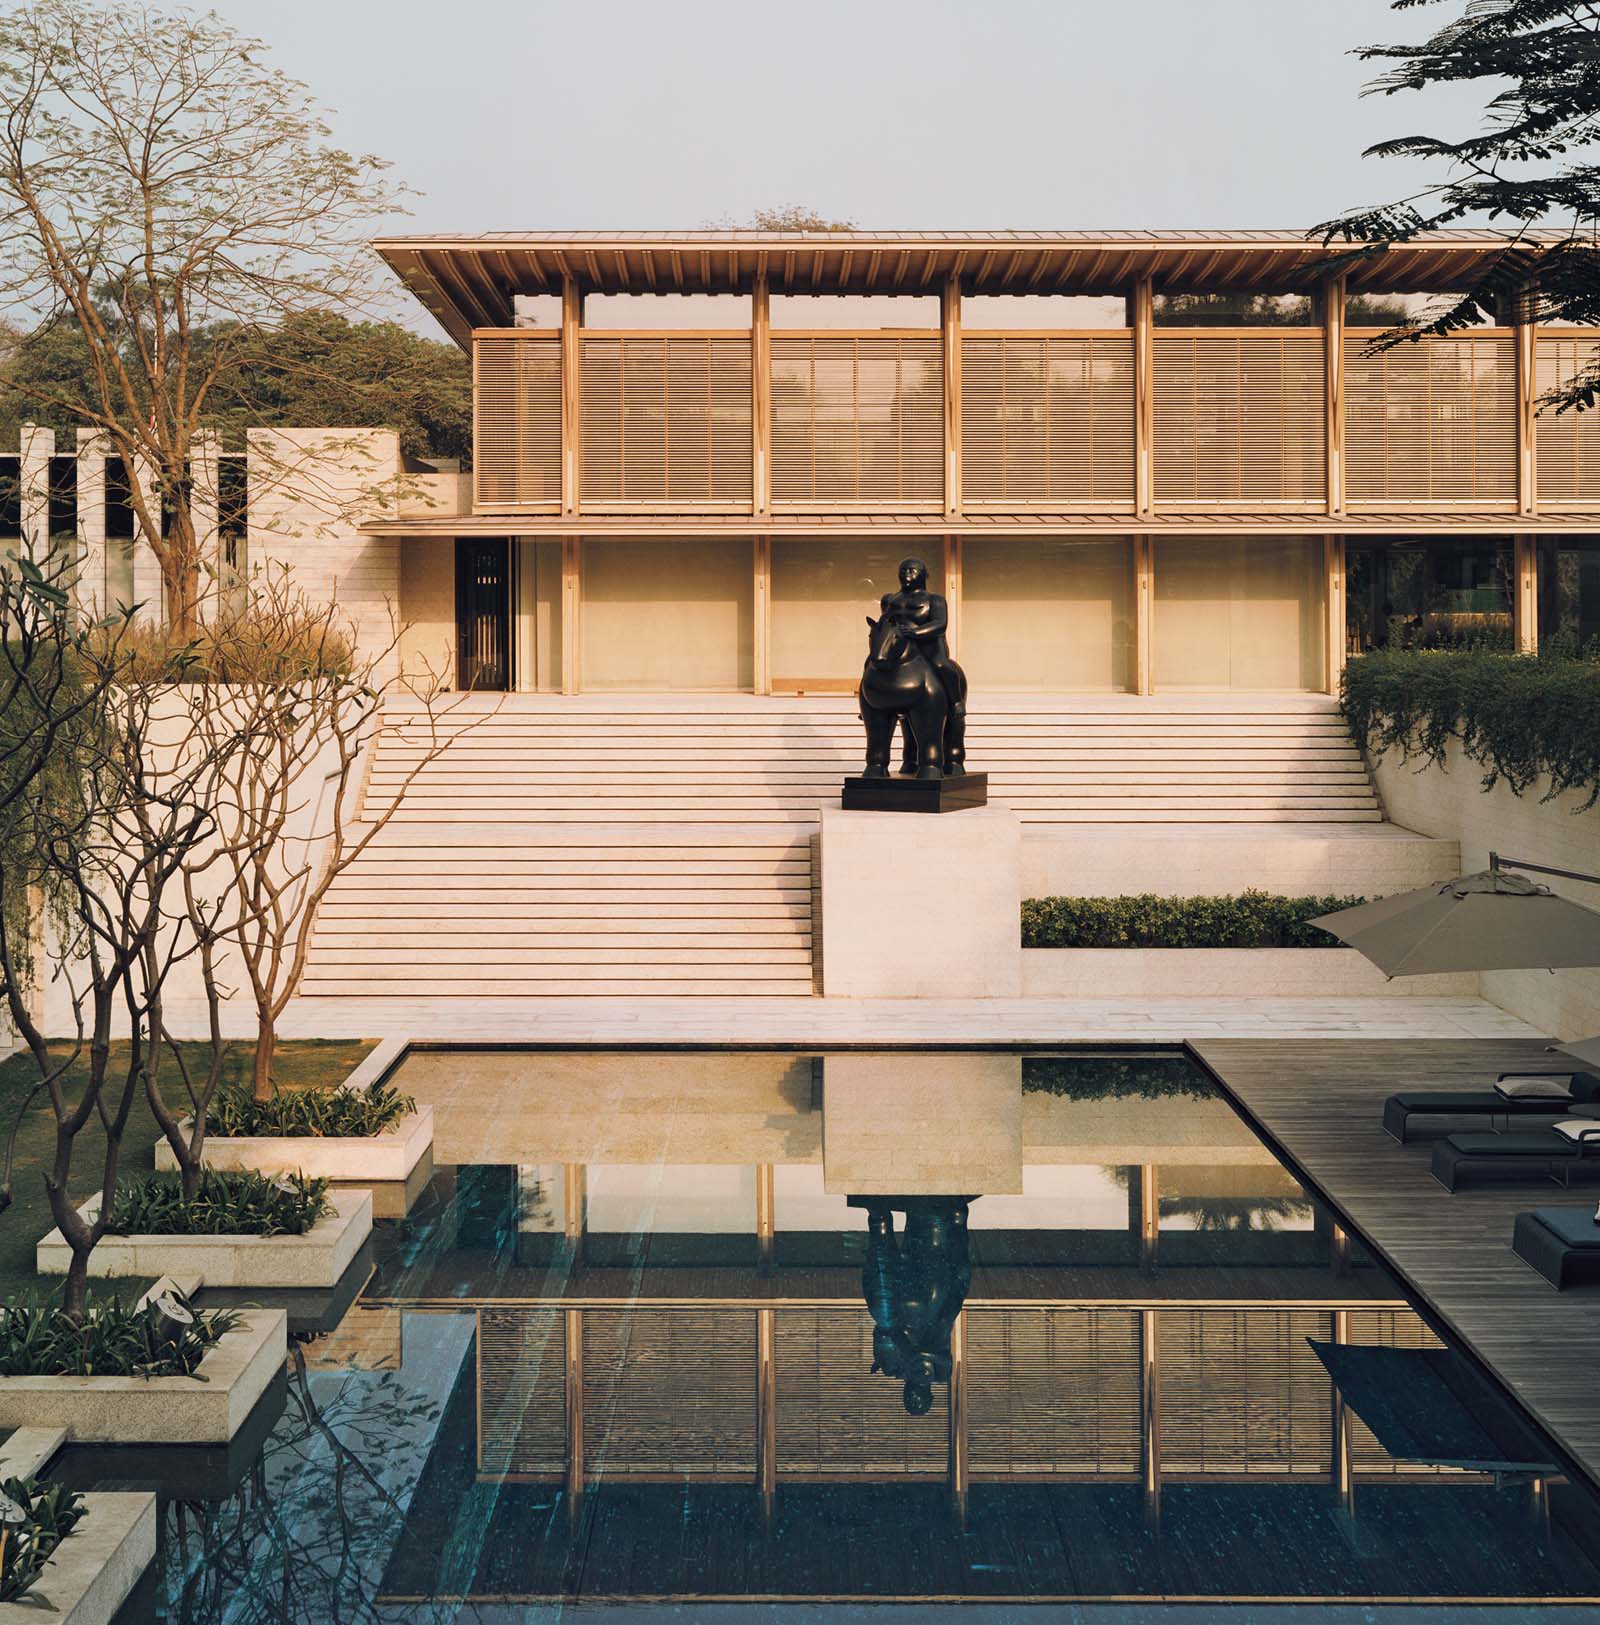 A modernist palace in New Delhi